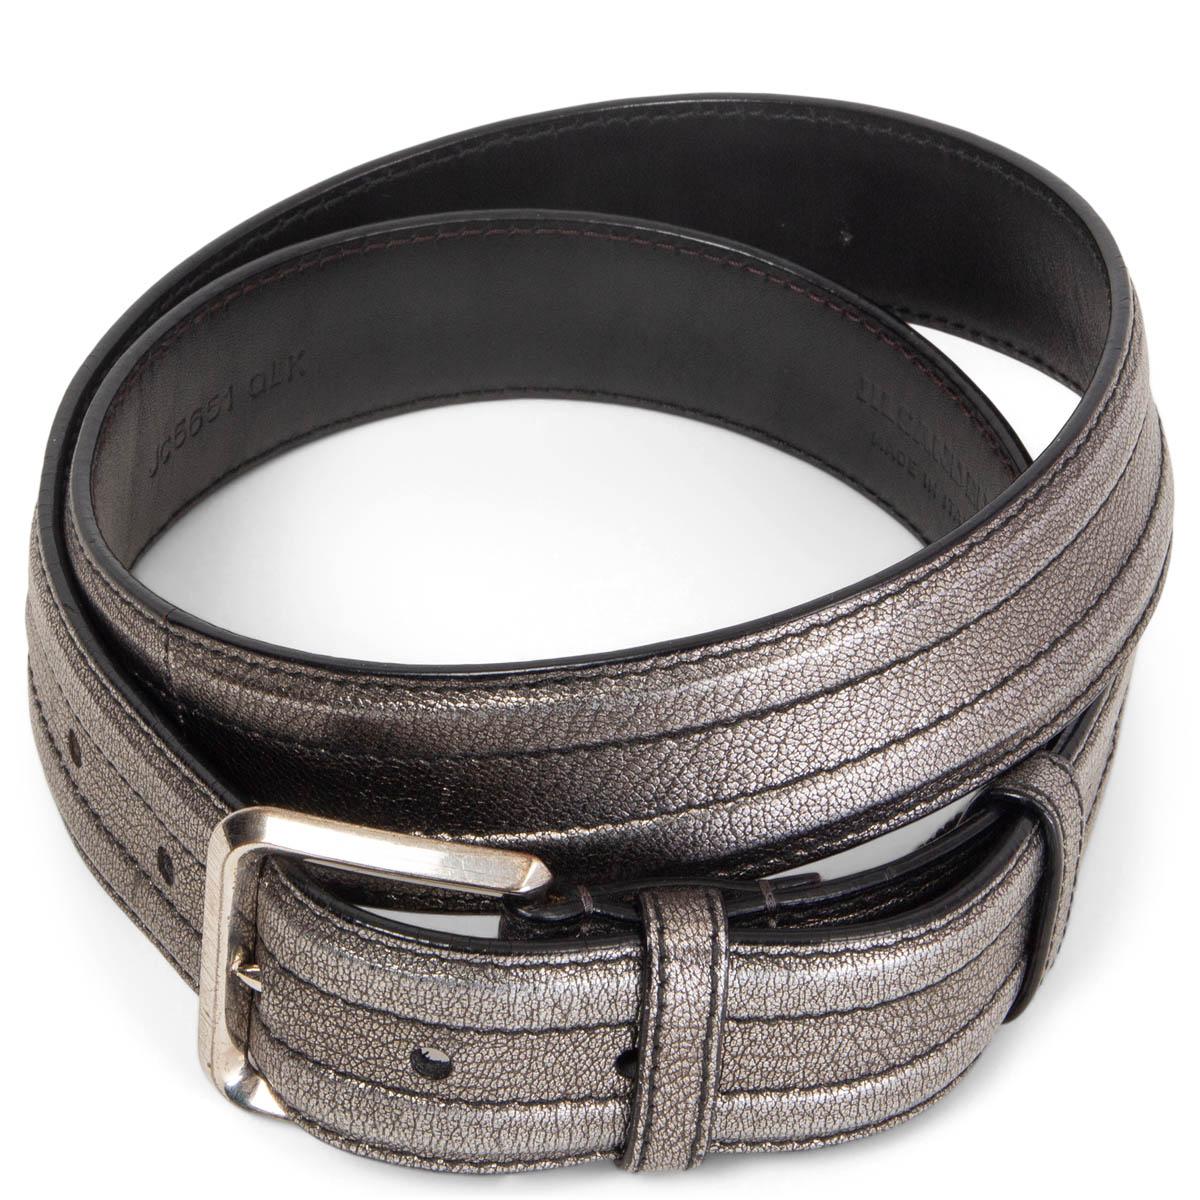 100% authentic Jil Sander belt in metallic silver and black leather featuring silver-tone metal buckle. Has been worn   and shows some faint signs of wear. Overall in very good condition. 

Measurements
Tag Size	95
Width	3.5cm (1.4in)
Fits	74cm